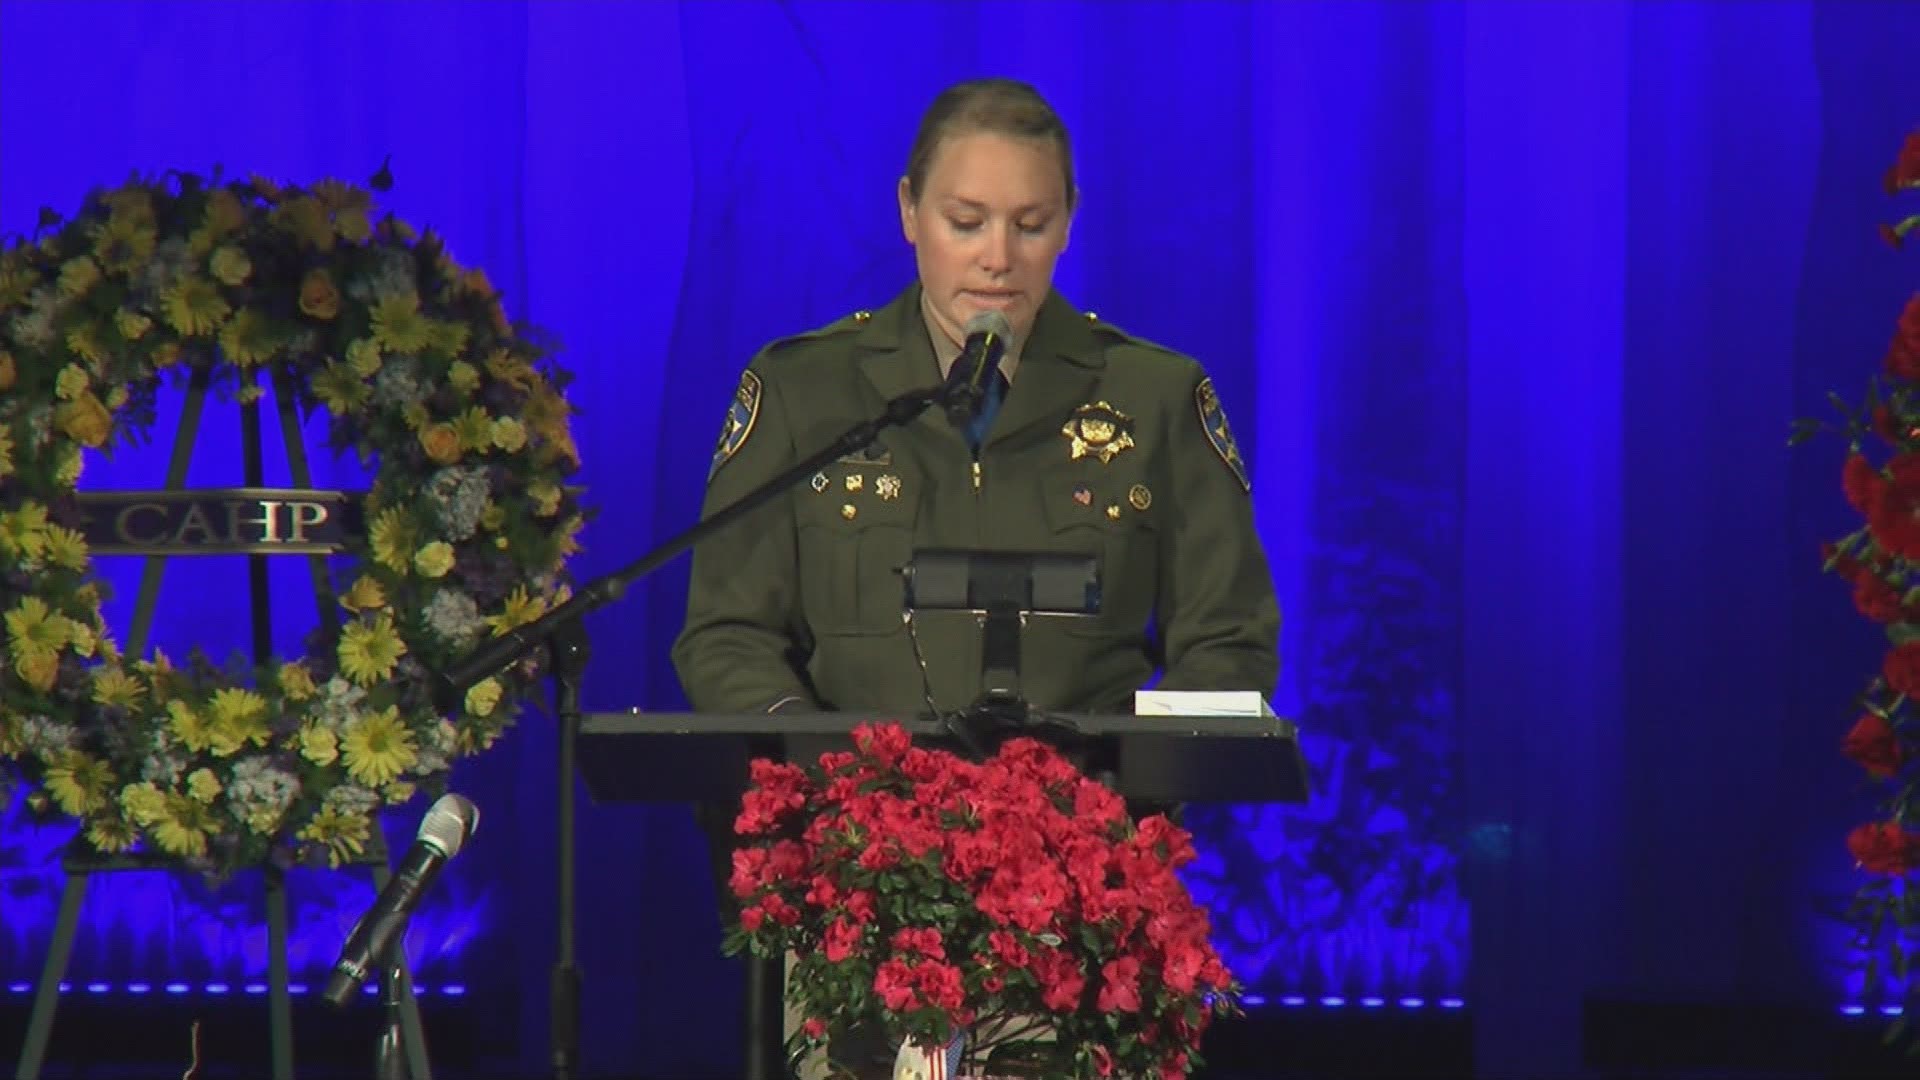 Fallen CHP Officer Lucas Chellew's sister, CHP Officer Hanna Chellew, spoke tearfully at her brother's funeral service Saturday morning (March 4, 2017).